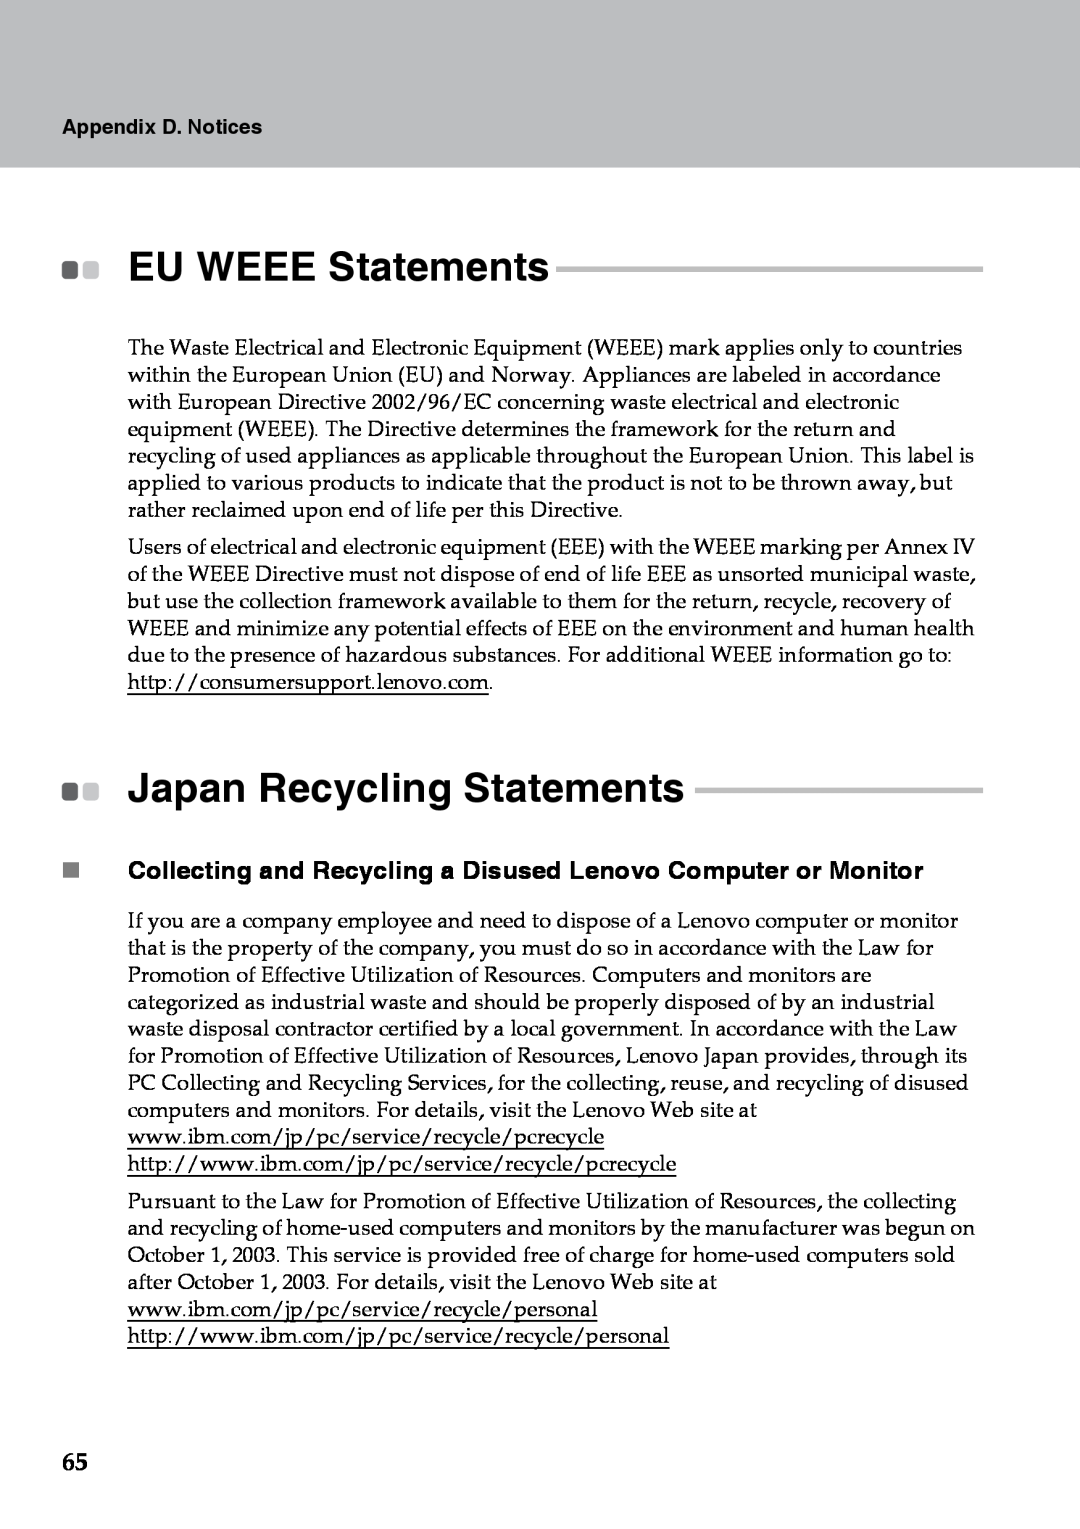 Lenovo Y510 warranty EU WEEE Statements, Japan Recycling Statements, Appendix D. Notices 